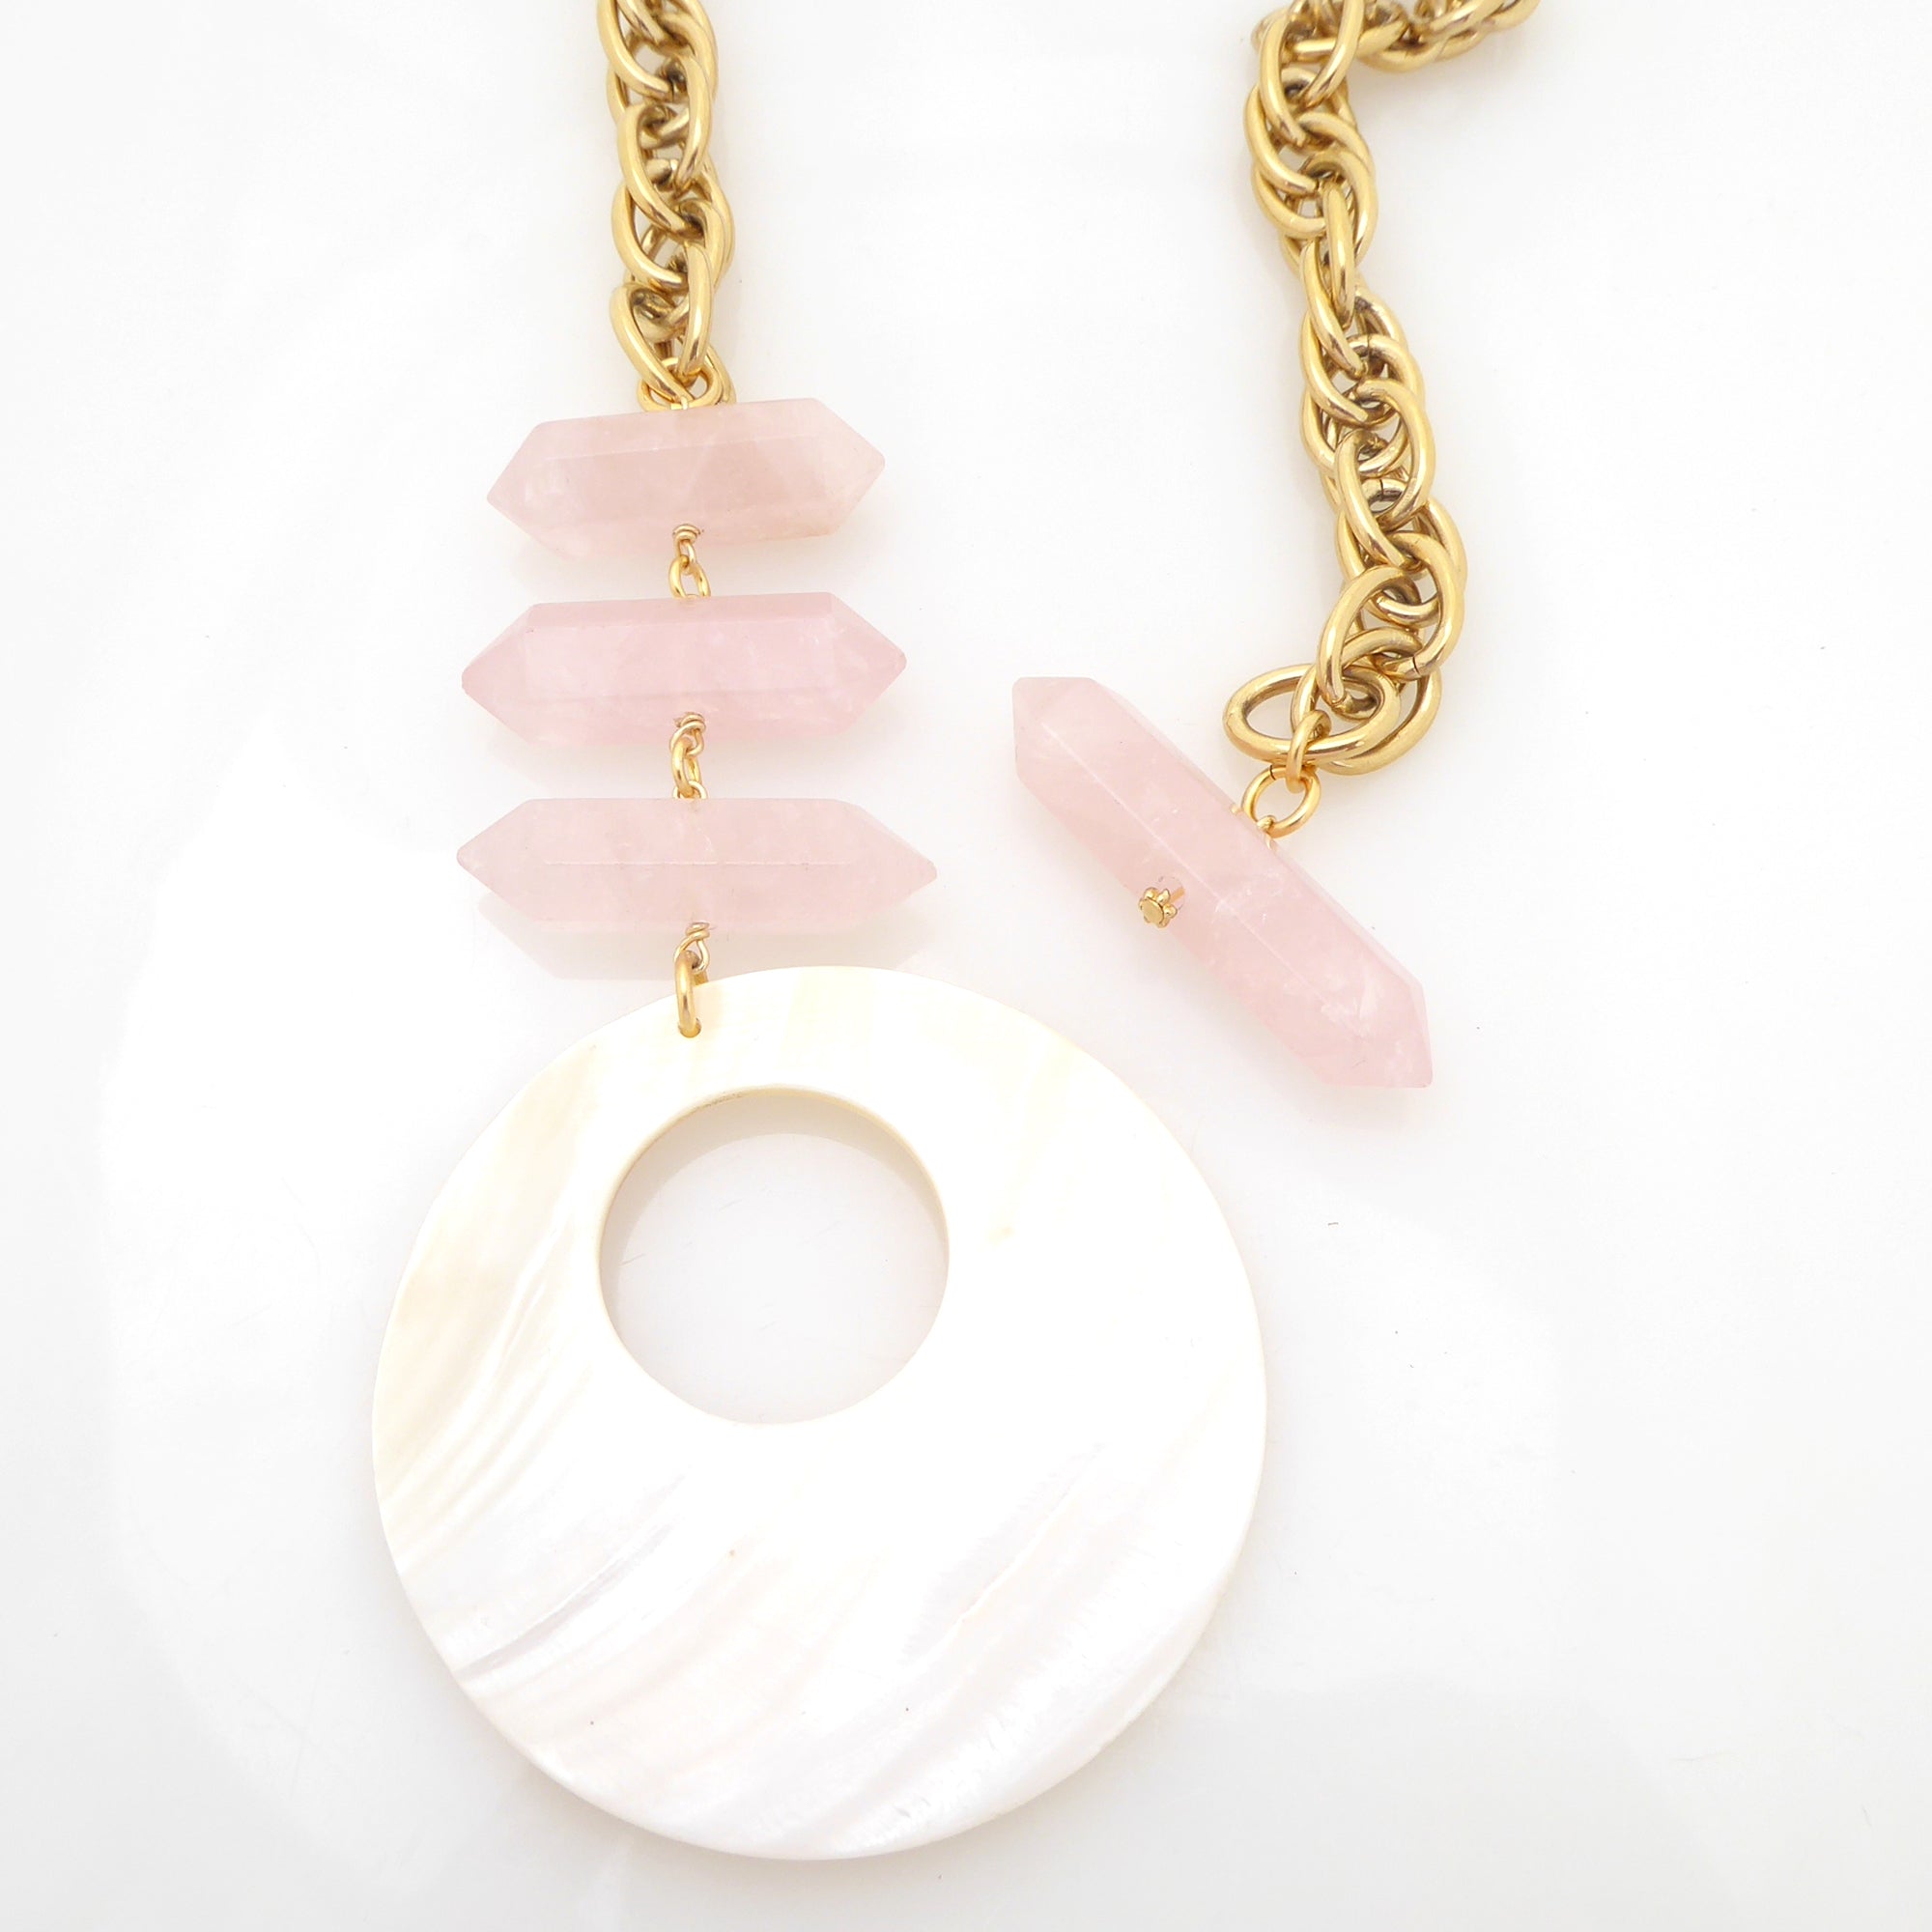 Marna rose quartz and shell necklace by Jenny Dayco 6